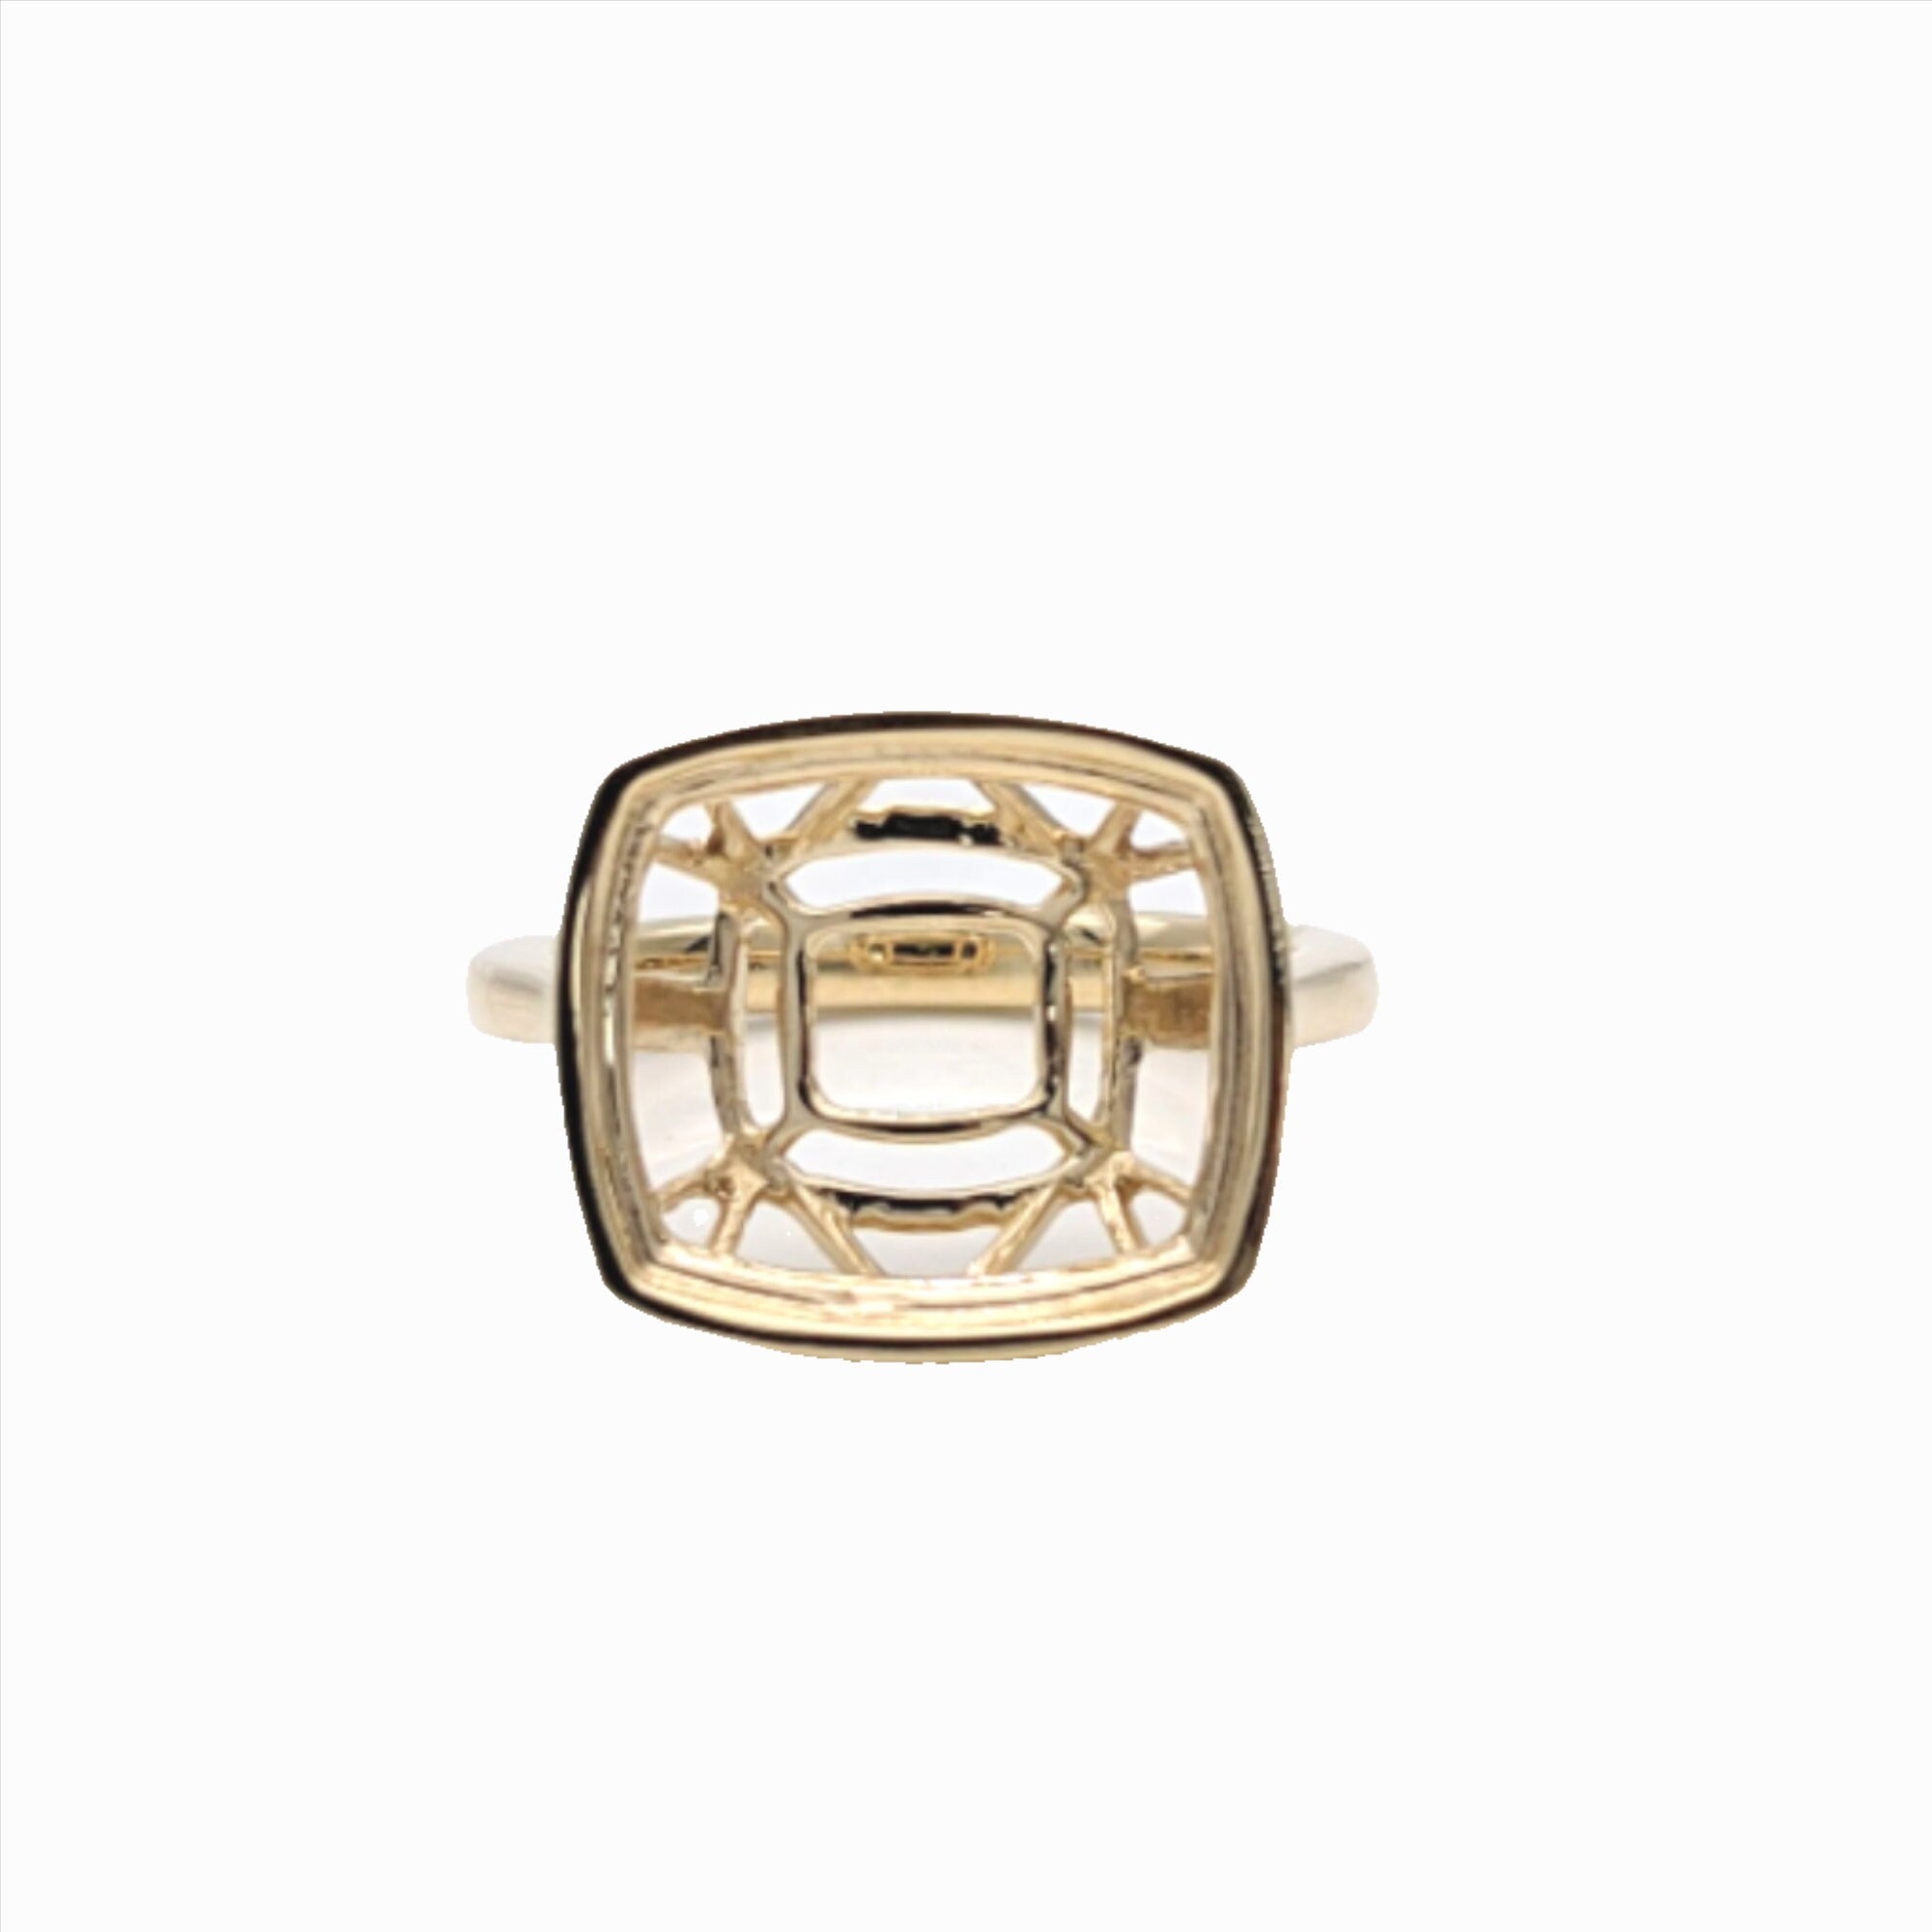 Bezel Set Ring Mount w a Rounded Comfort Shank in Solid 14k Gold | Cushion Cut | Solitaire Setting | Customizable